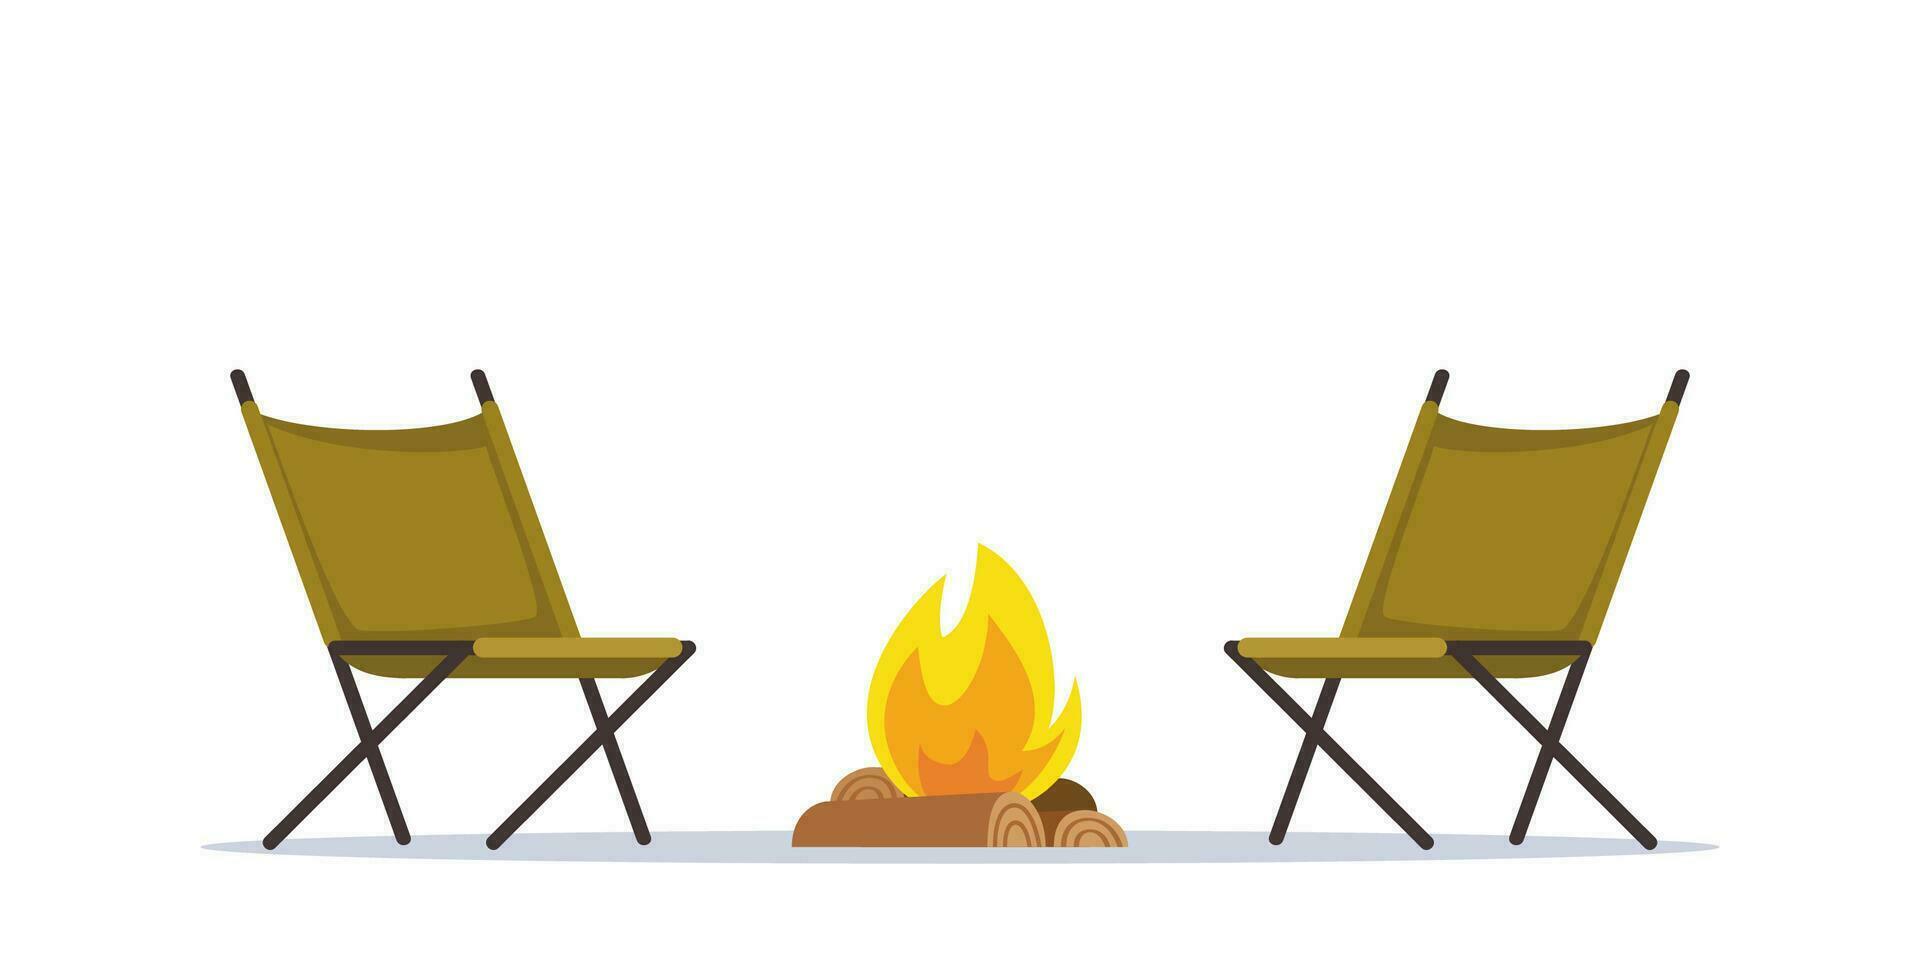 Campfire and camping chairs. Summer portable outdoor furniture for traveling. Climbing, hiking, trakking sport, adventure tourism, travel, backpacking. Vector illustration.